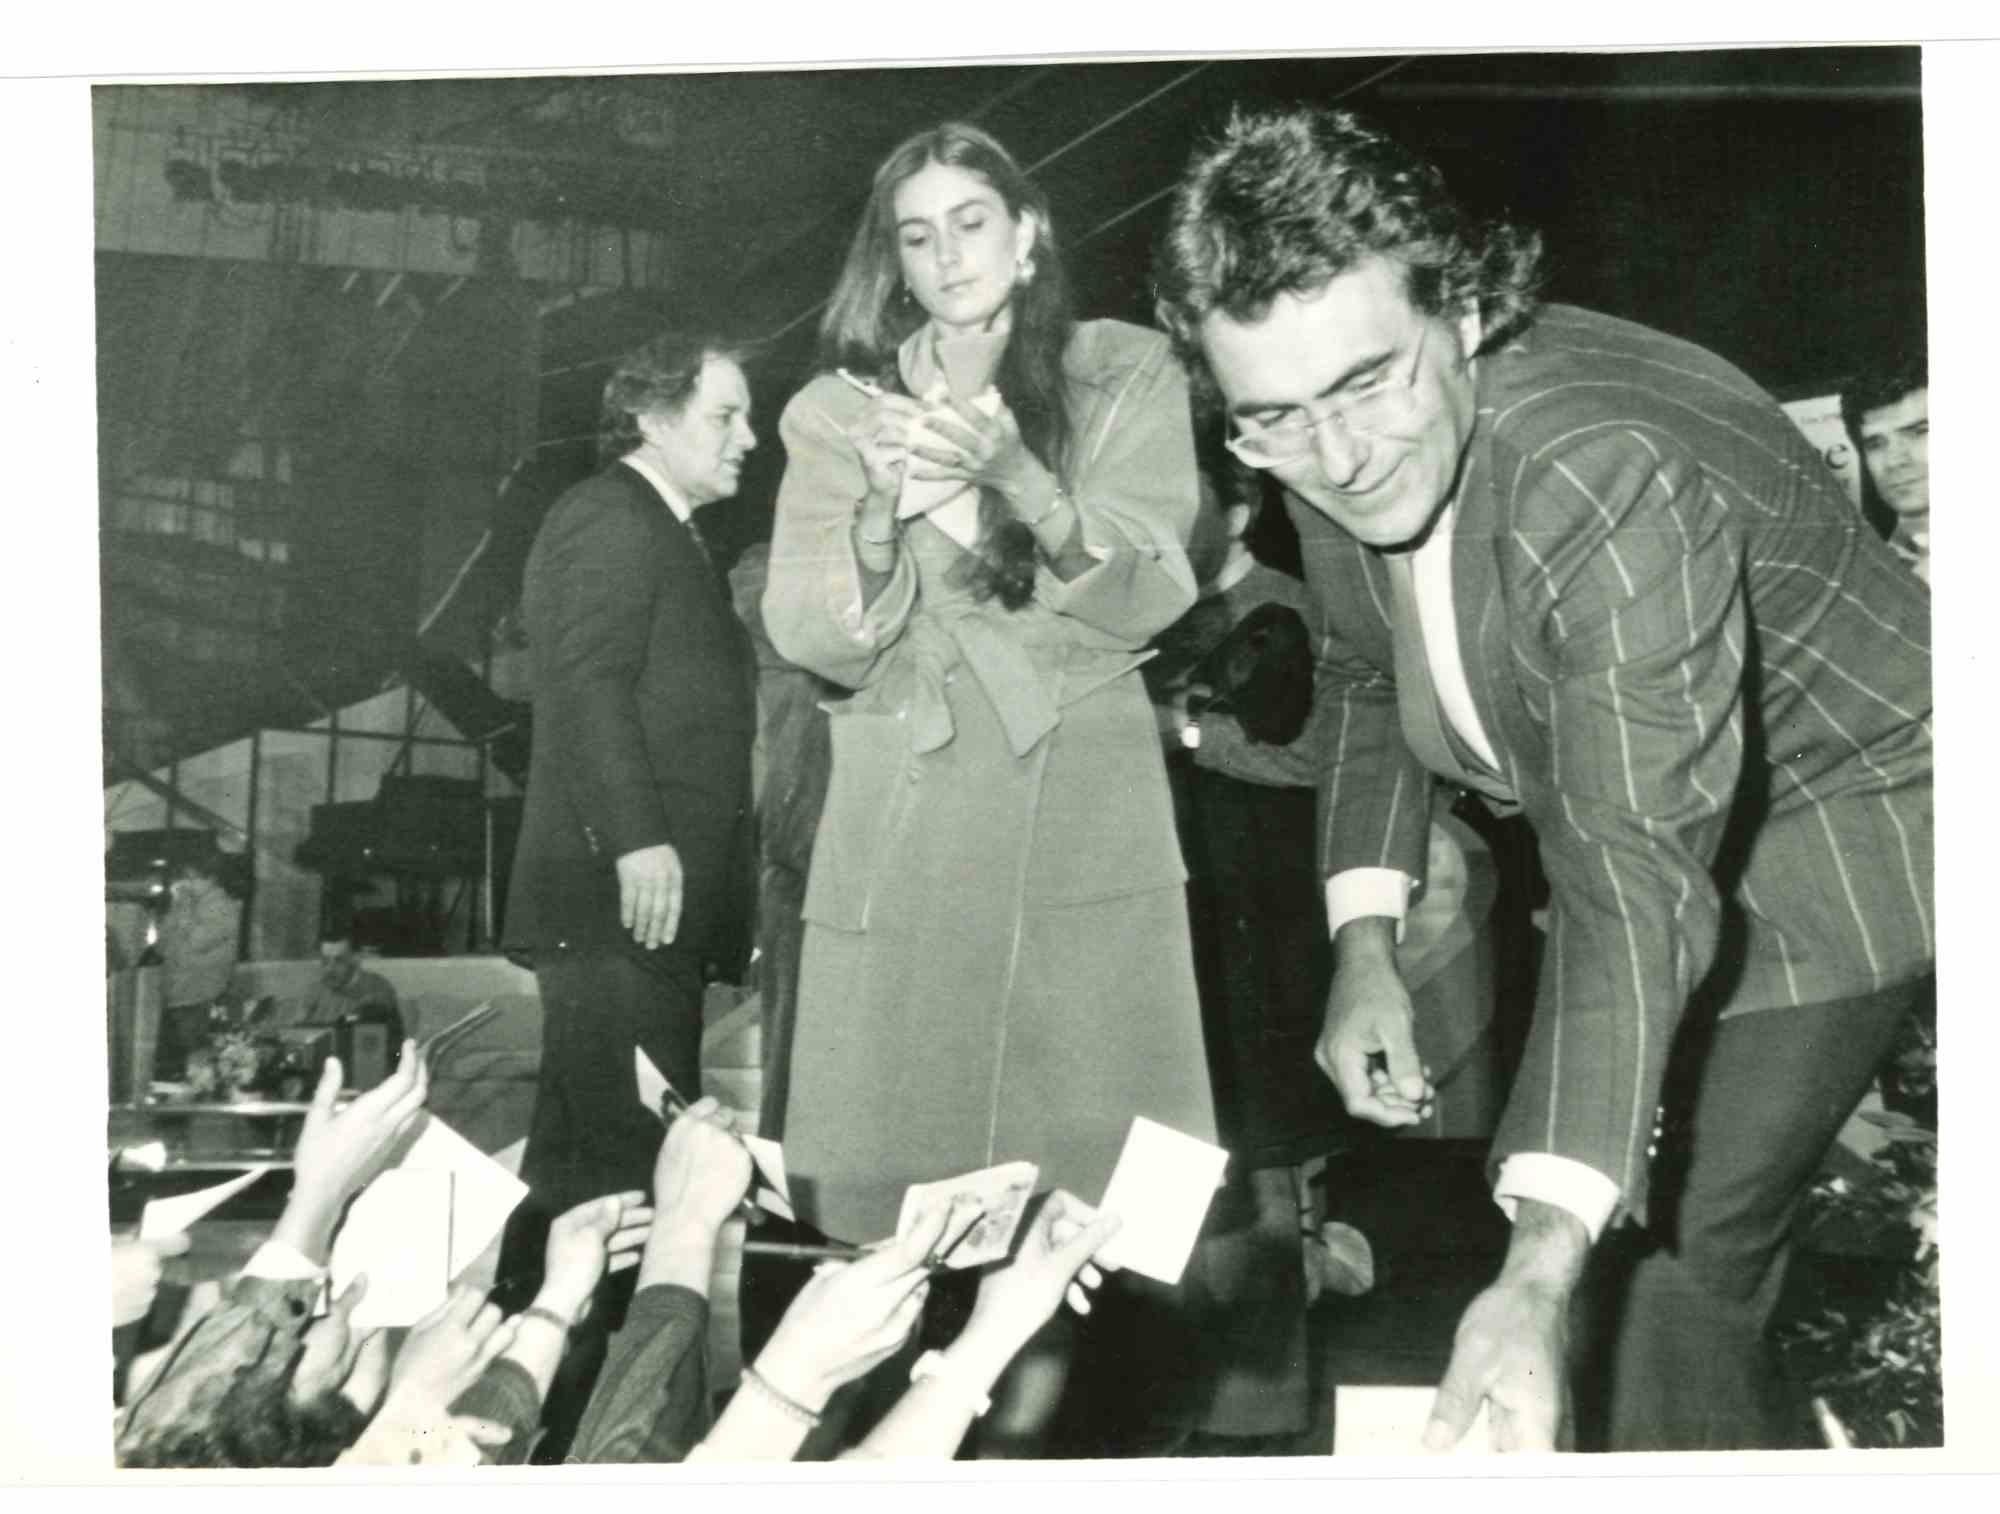 Unknown Figurative Photograph - Al Bano and Romina - Vintage Photograph - 1980s